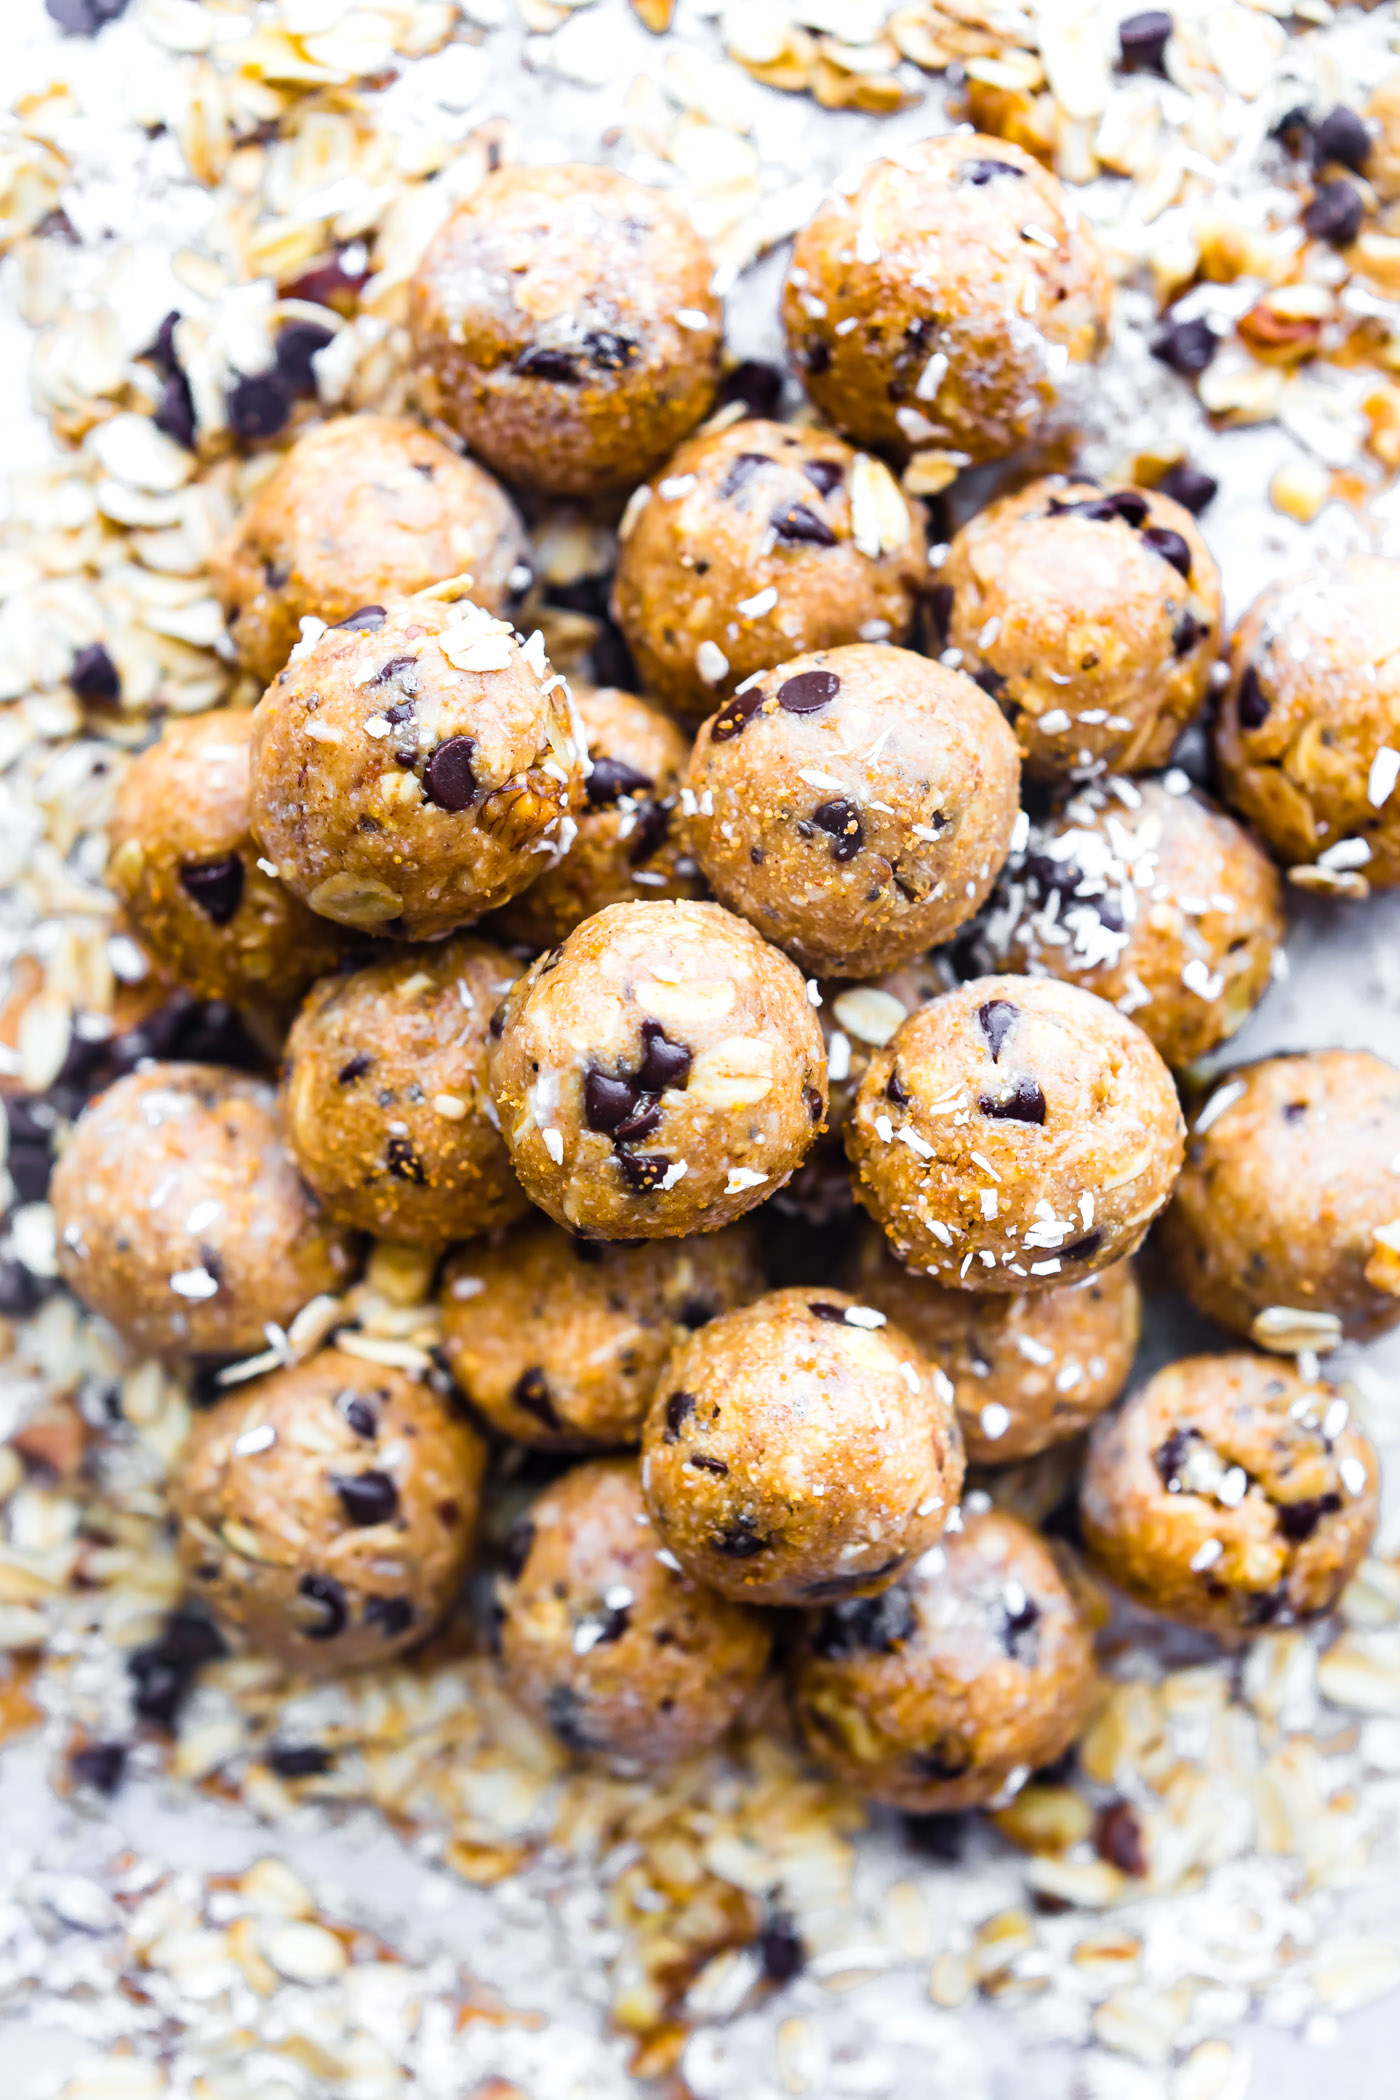 Cowboy Cookies in a no bake ENERGY BITES form! Yes, the best of both worlds. No baking, vegan energy bites that taste like cowboy cookies! Soft, chewy, and loaded with a variety of flavors. Gluten free!